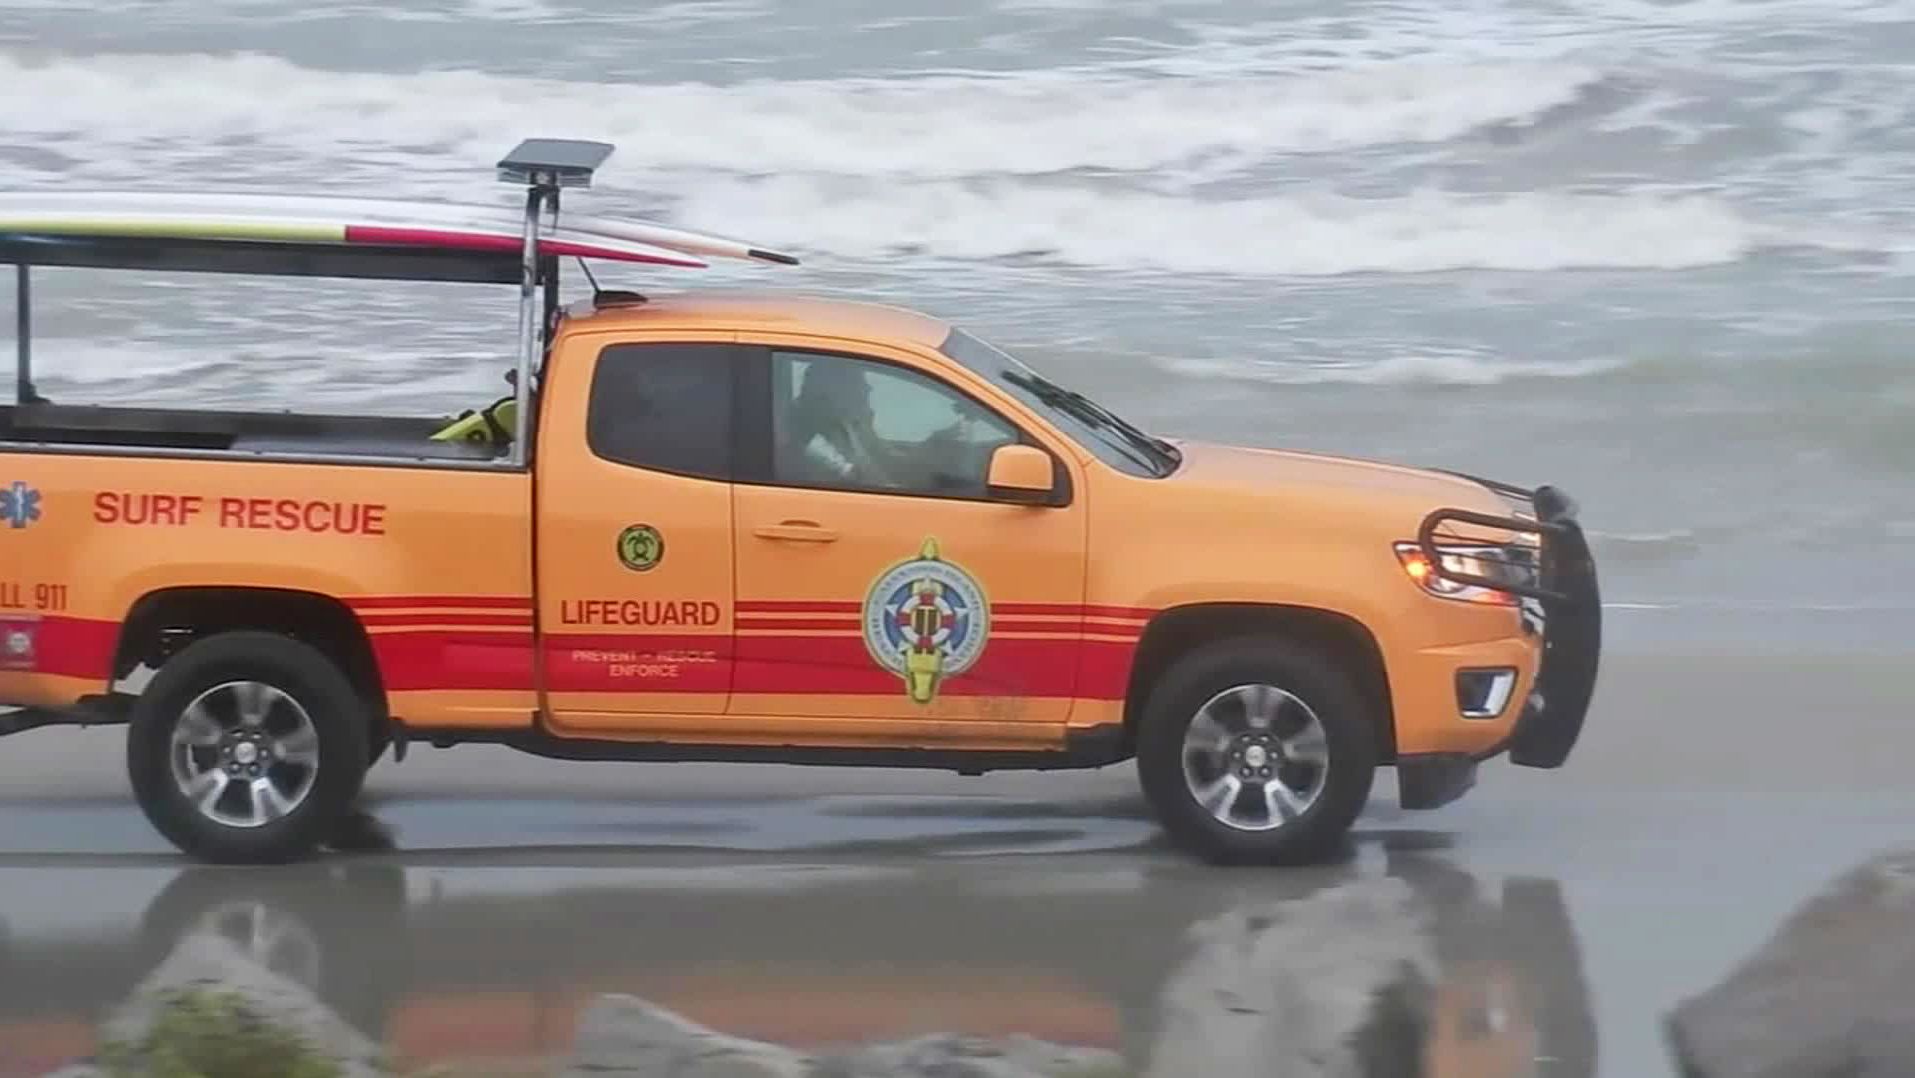 Galveston Island Beach Patrol prepared for rescues as the storm moved through.